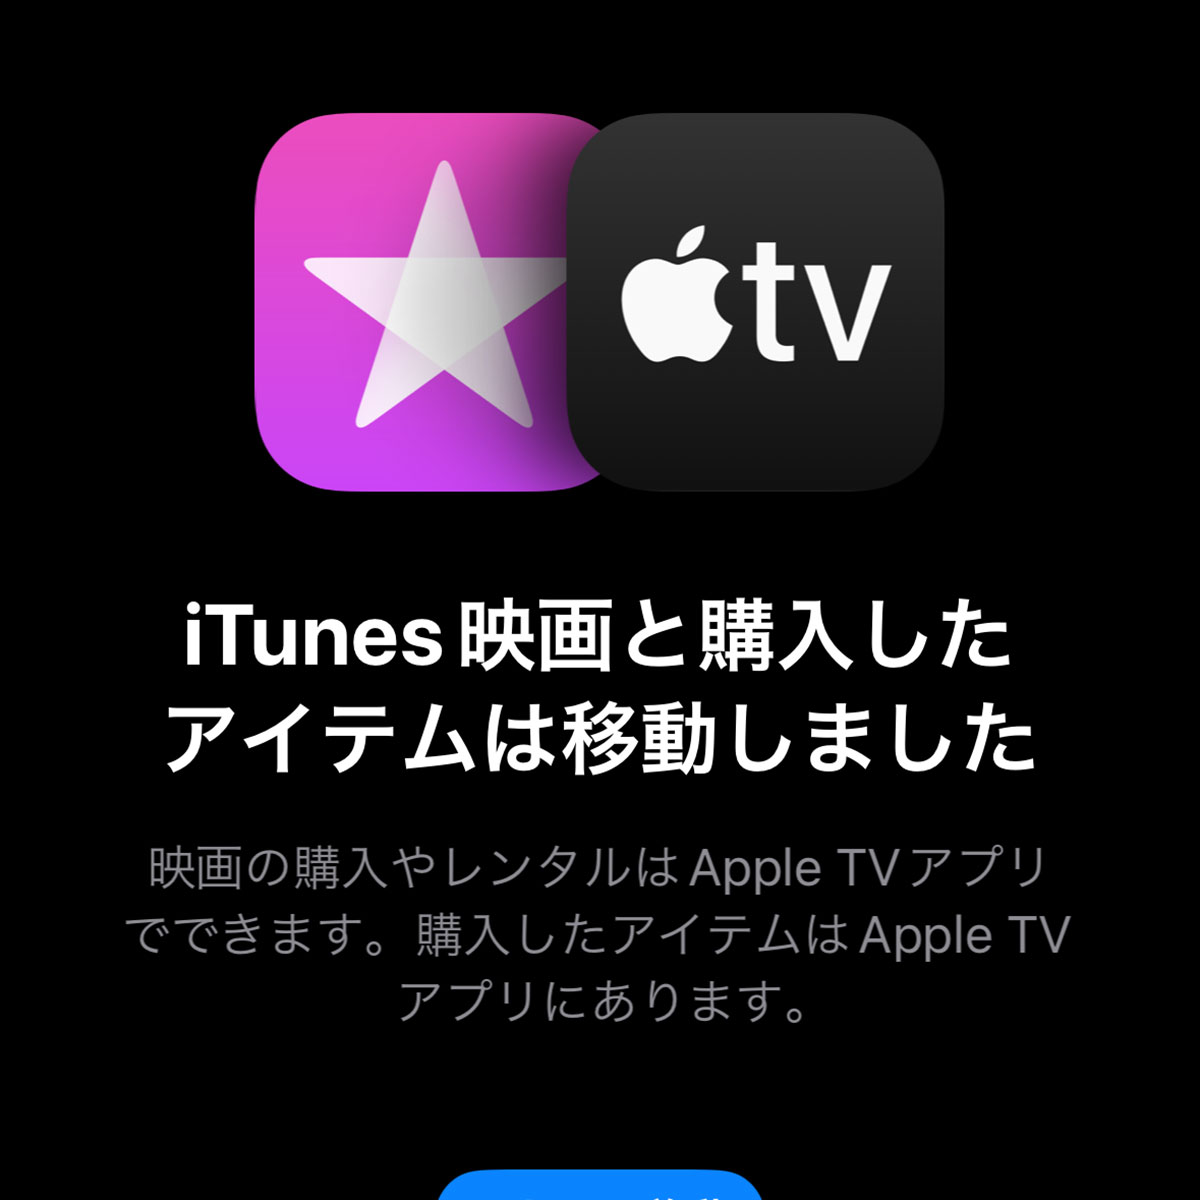 iTunes映画と購入したアイテムは移動しました